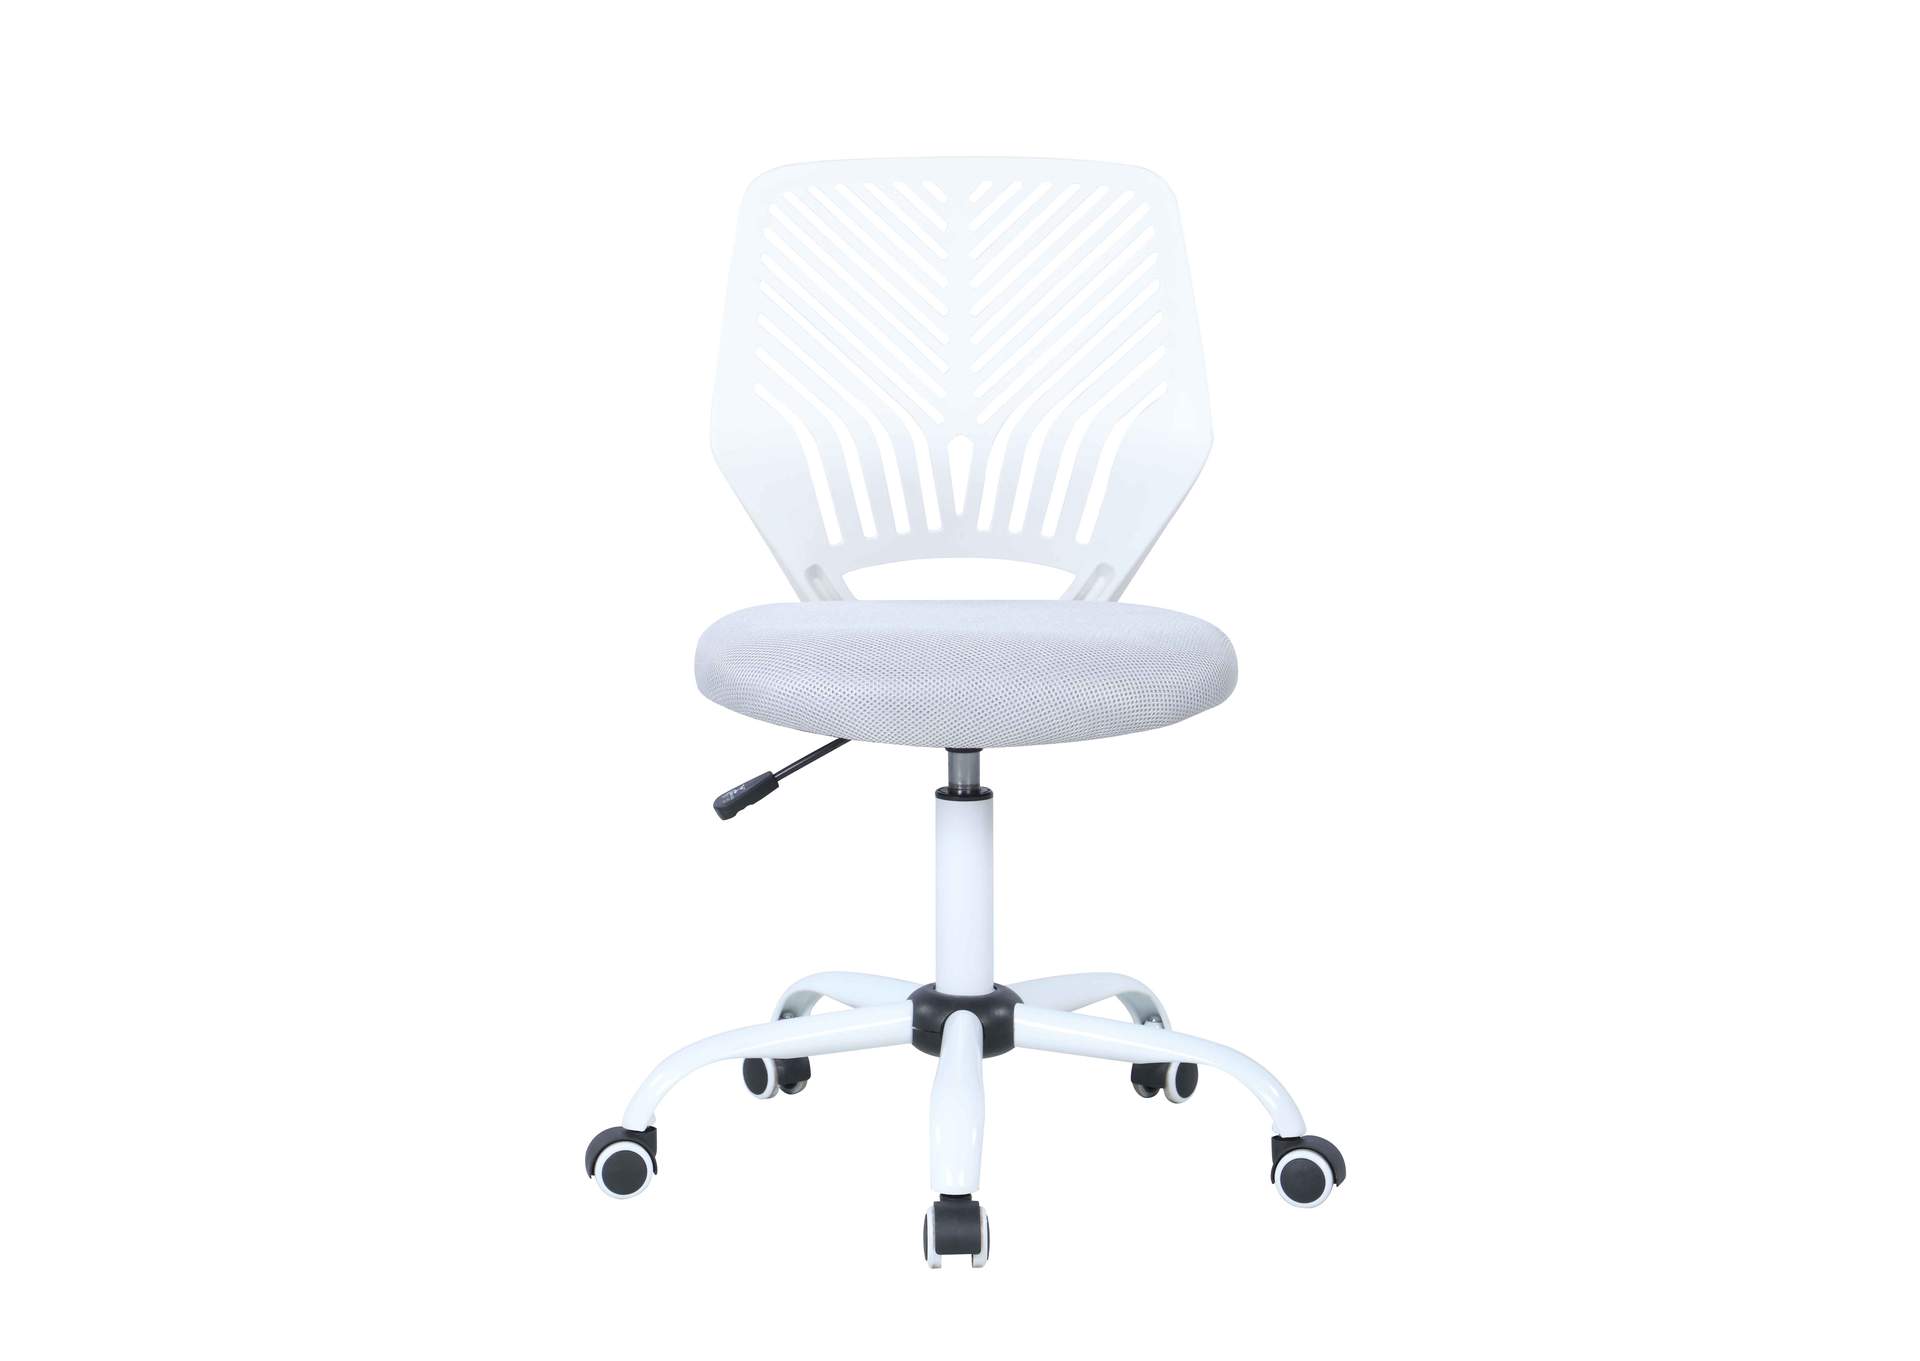 Modern 2 Tone Pneumatic Adjustable-Height Computer Chair,Chintaly Imports